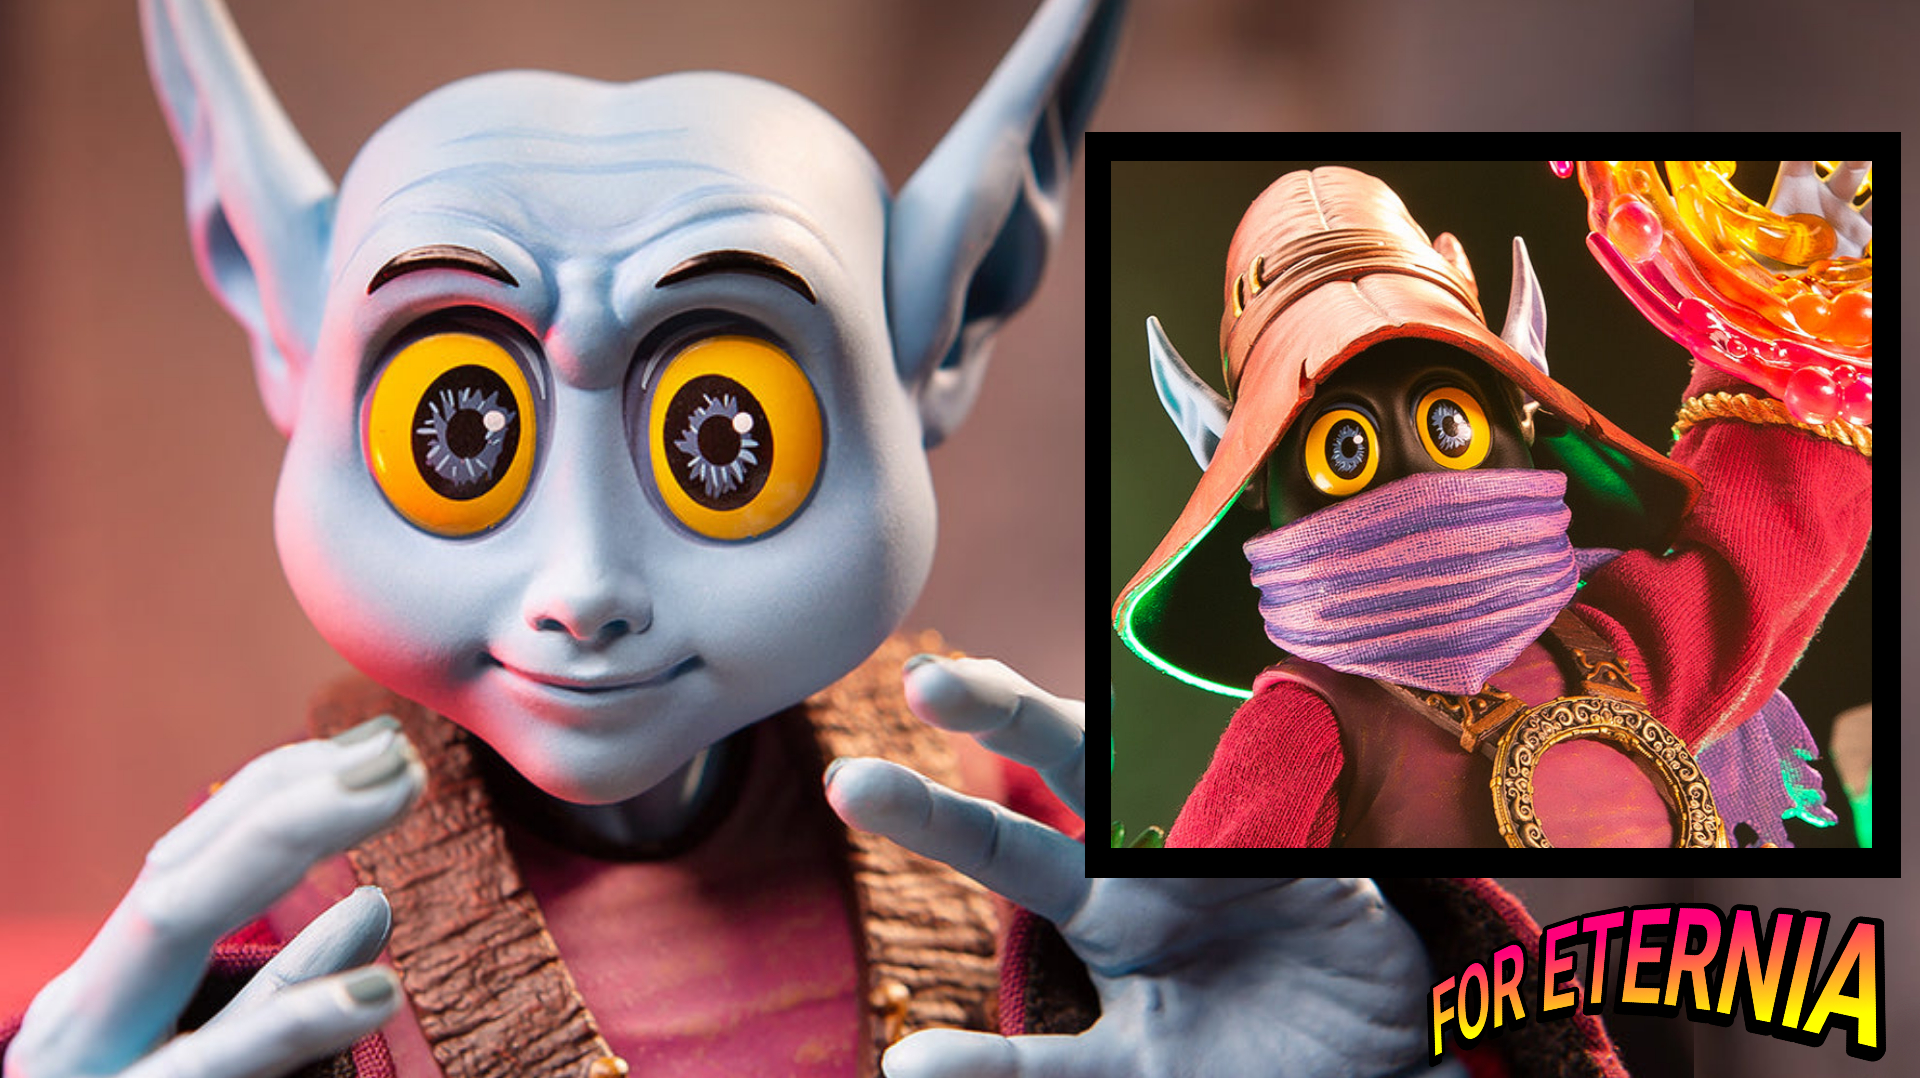 Pre-Orders for Mondo’s Masters of the Universe ORKO 1:6 Scale Figure – Timed Edition begin January 23rd